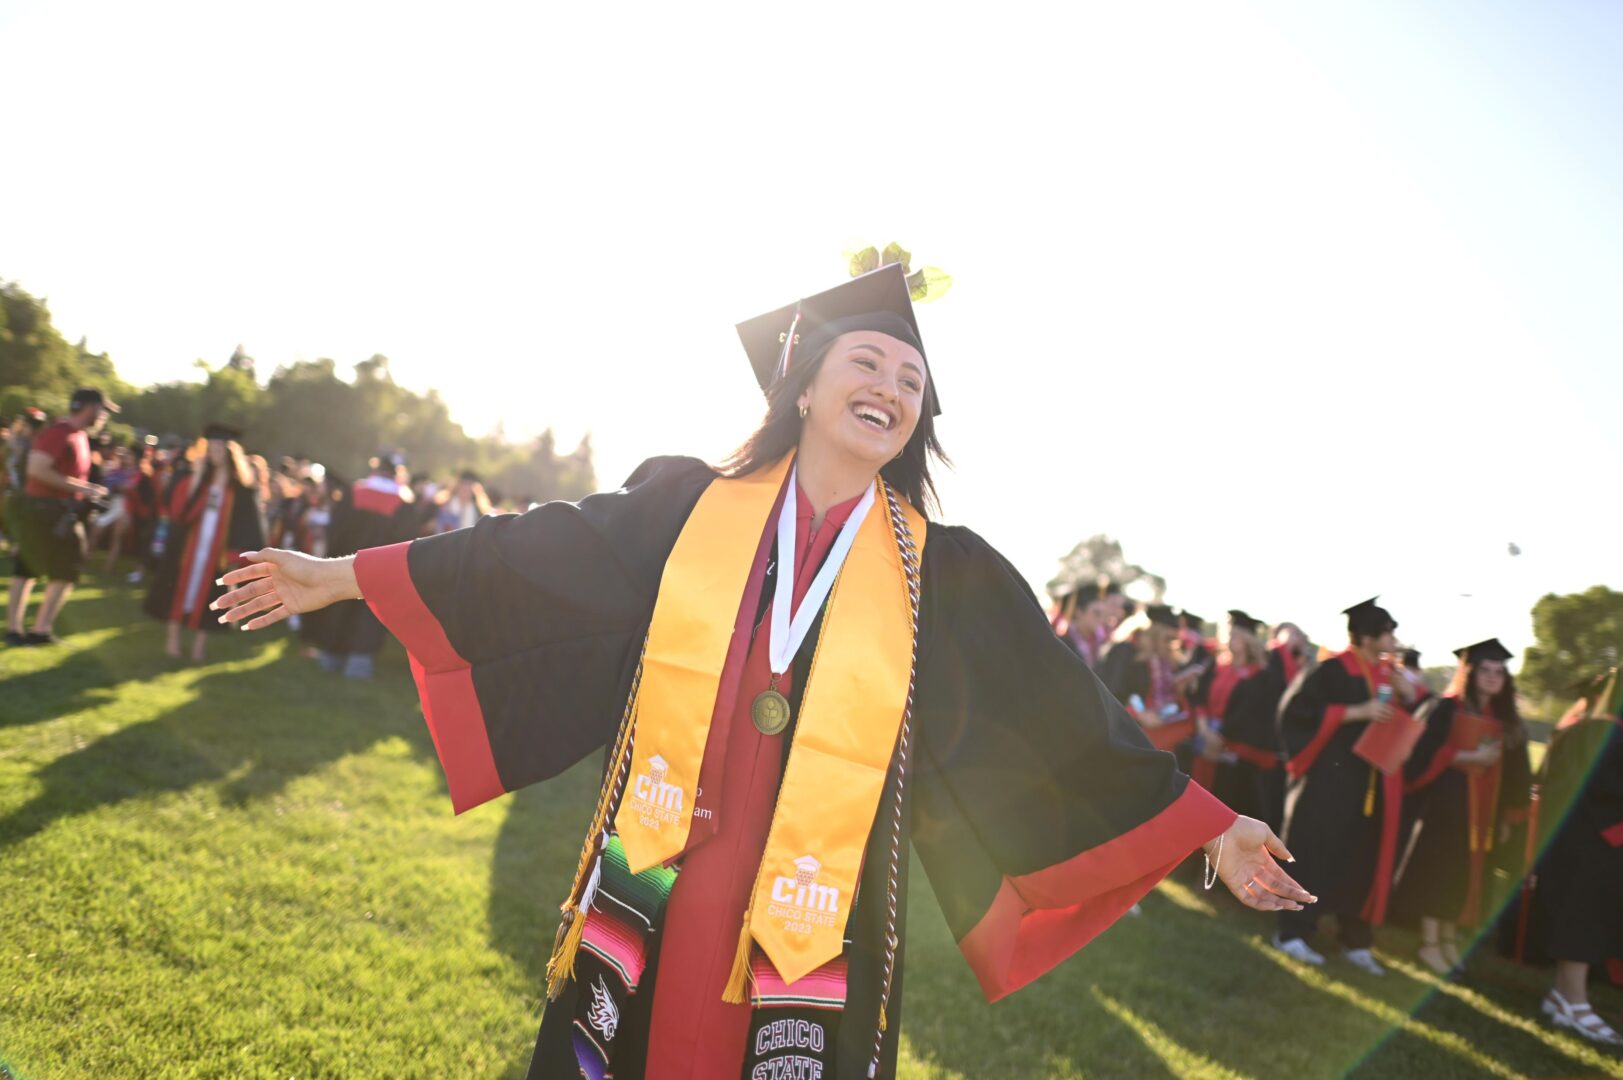 A college student in cap and gown stands smiling with arms wide open